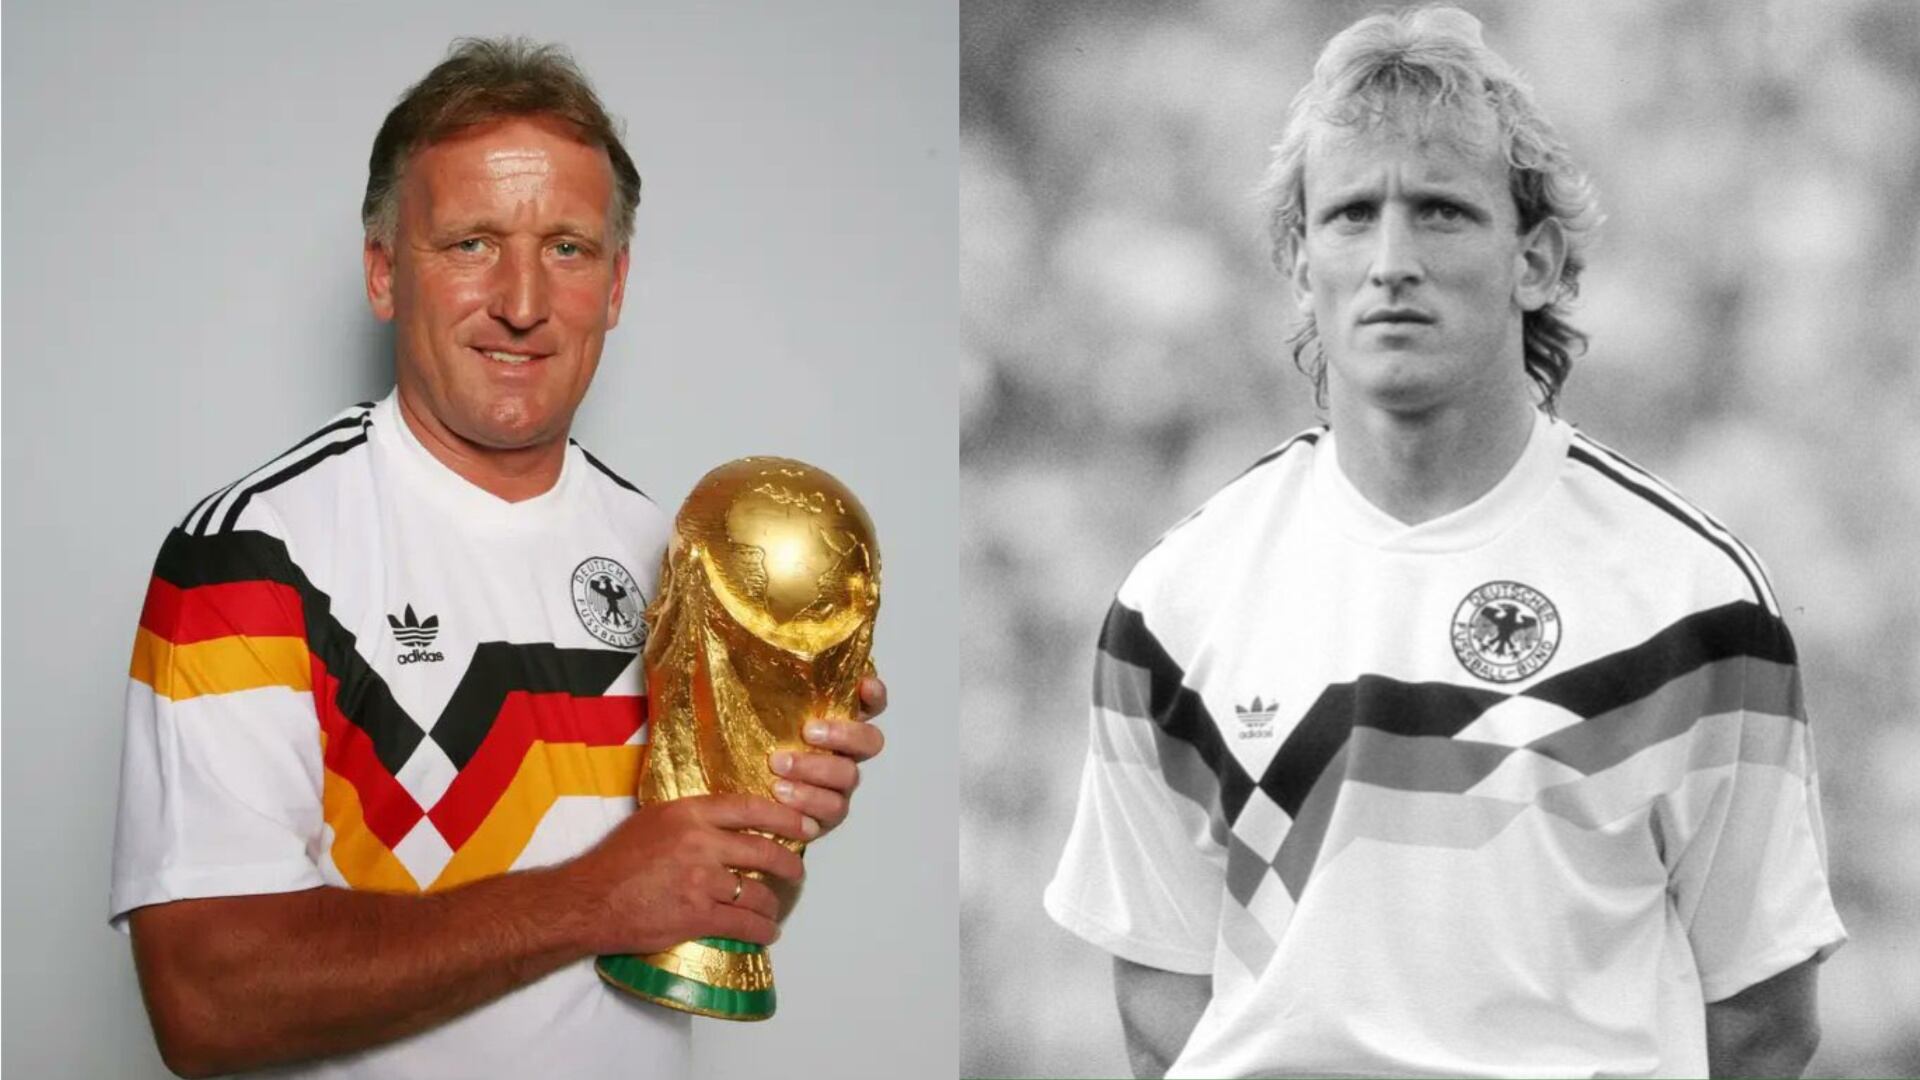 Andreas Brehme, the world champion who made Maradona cry and now sadly dies